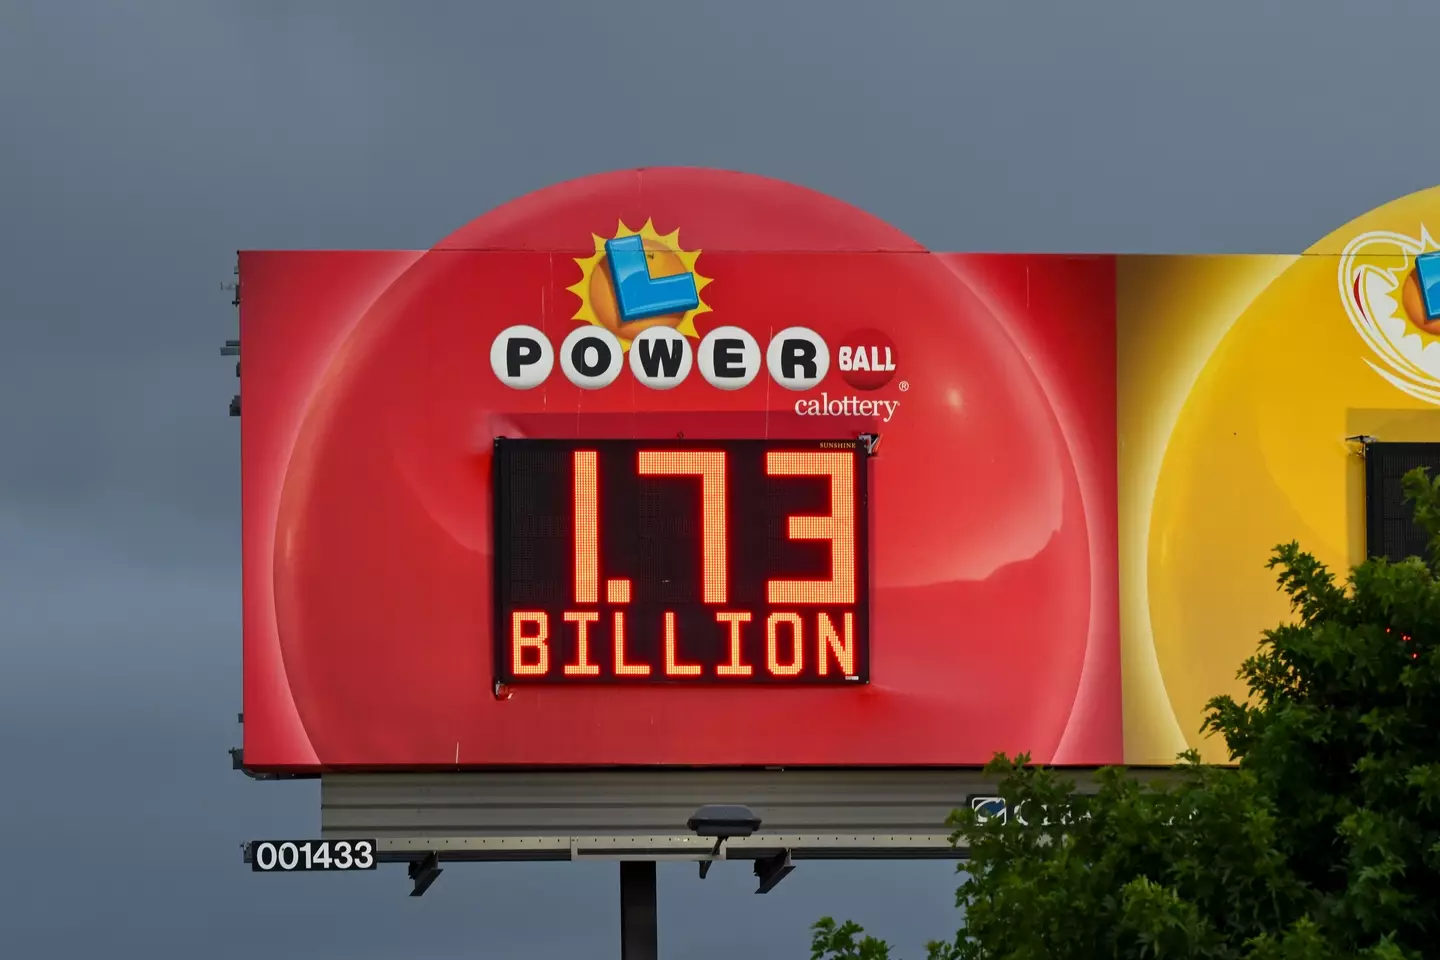 The Powerball was at $1.73 billion.